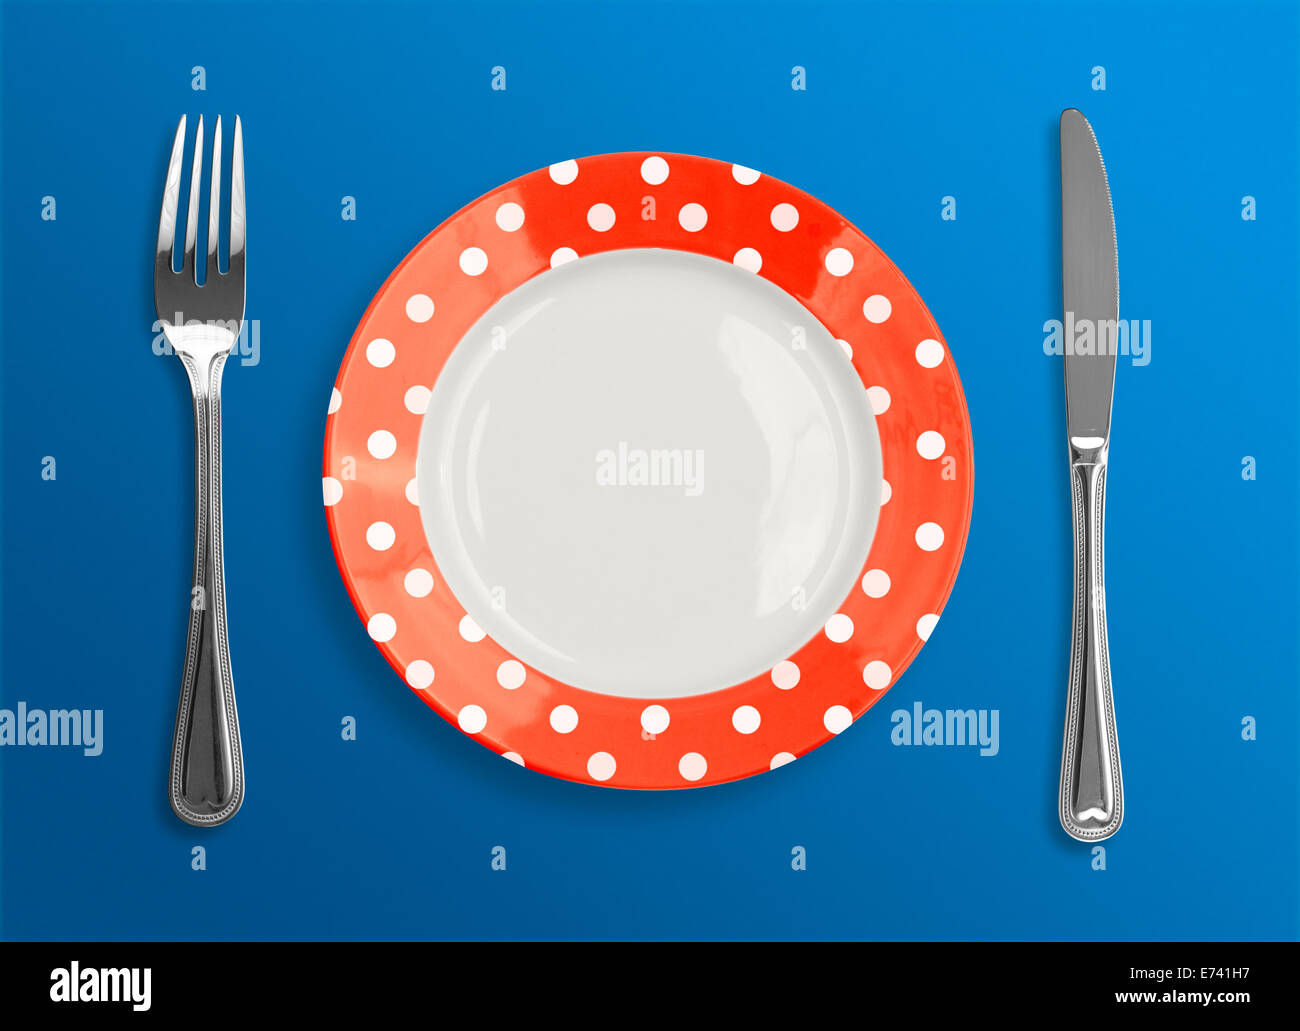 polka dot red plate with fork and knife top view on blue background Stock Photo